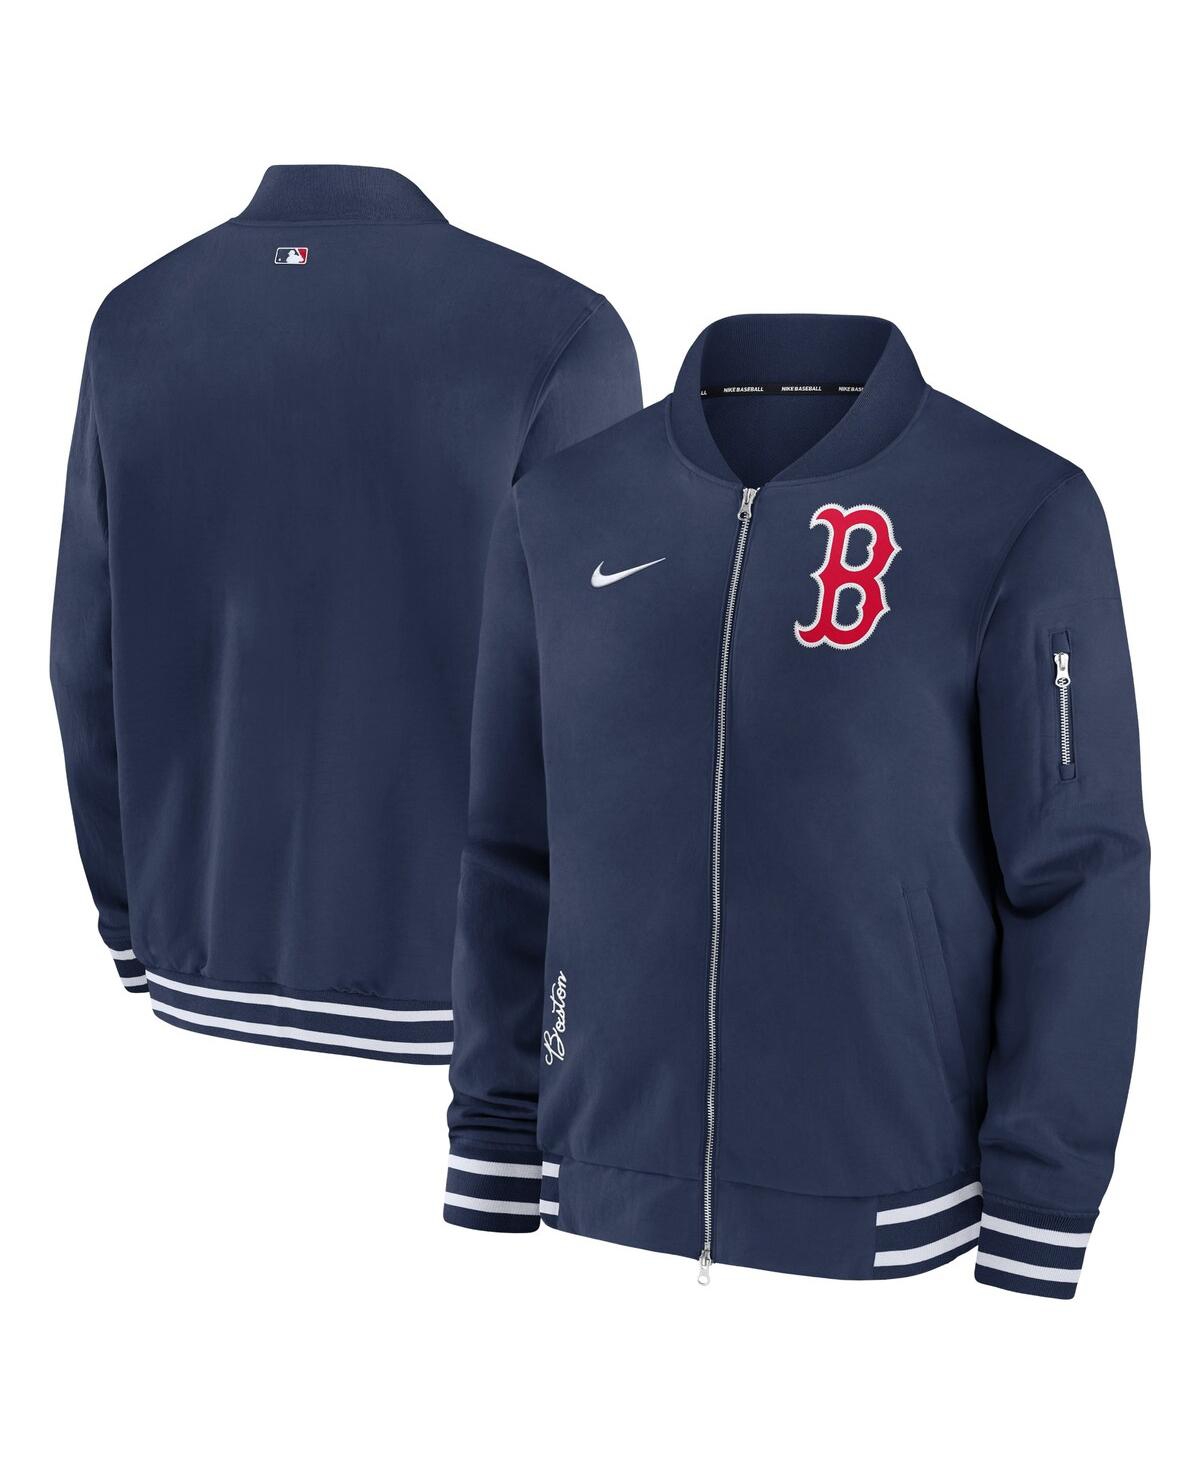 Men's Nike Navy Boston Red Sox Authentic Collection Full-Zip Bomber Jacket - Navy